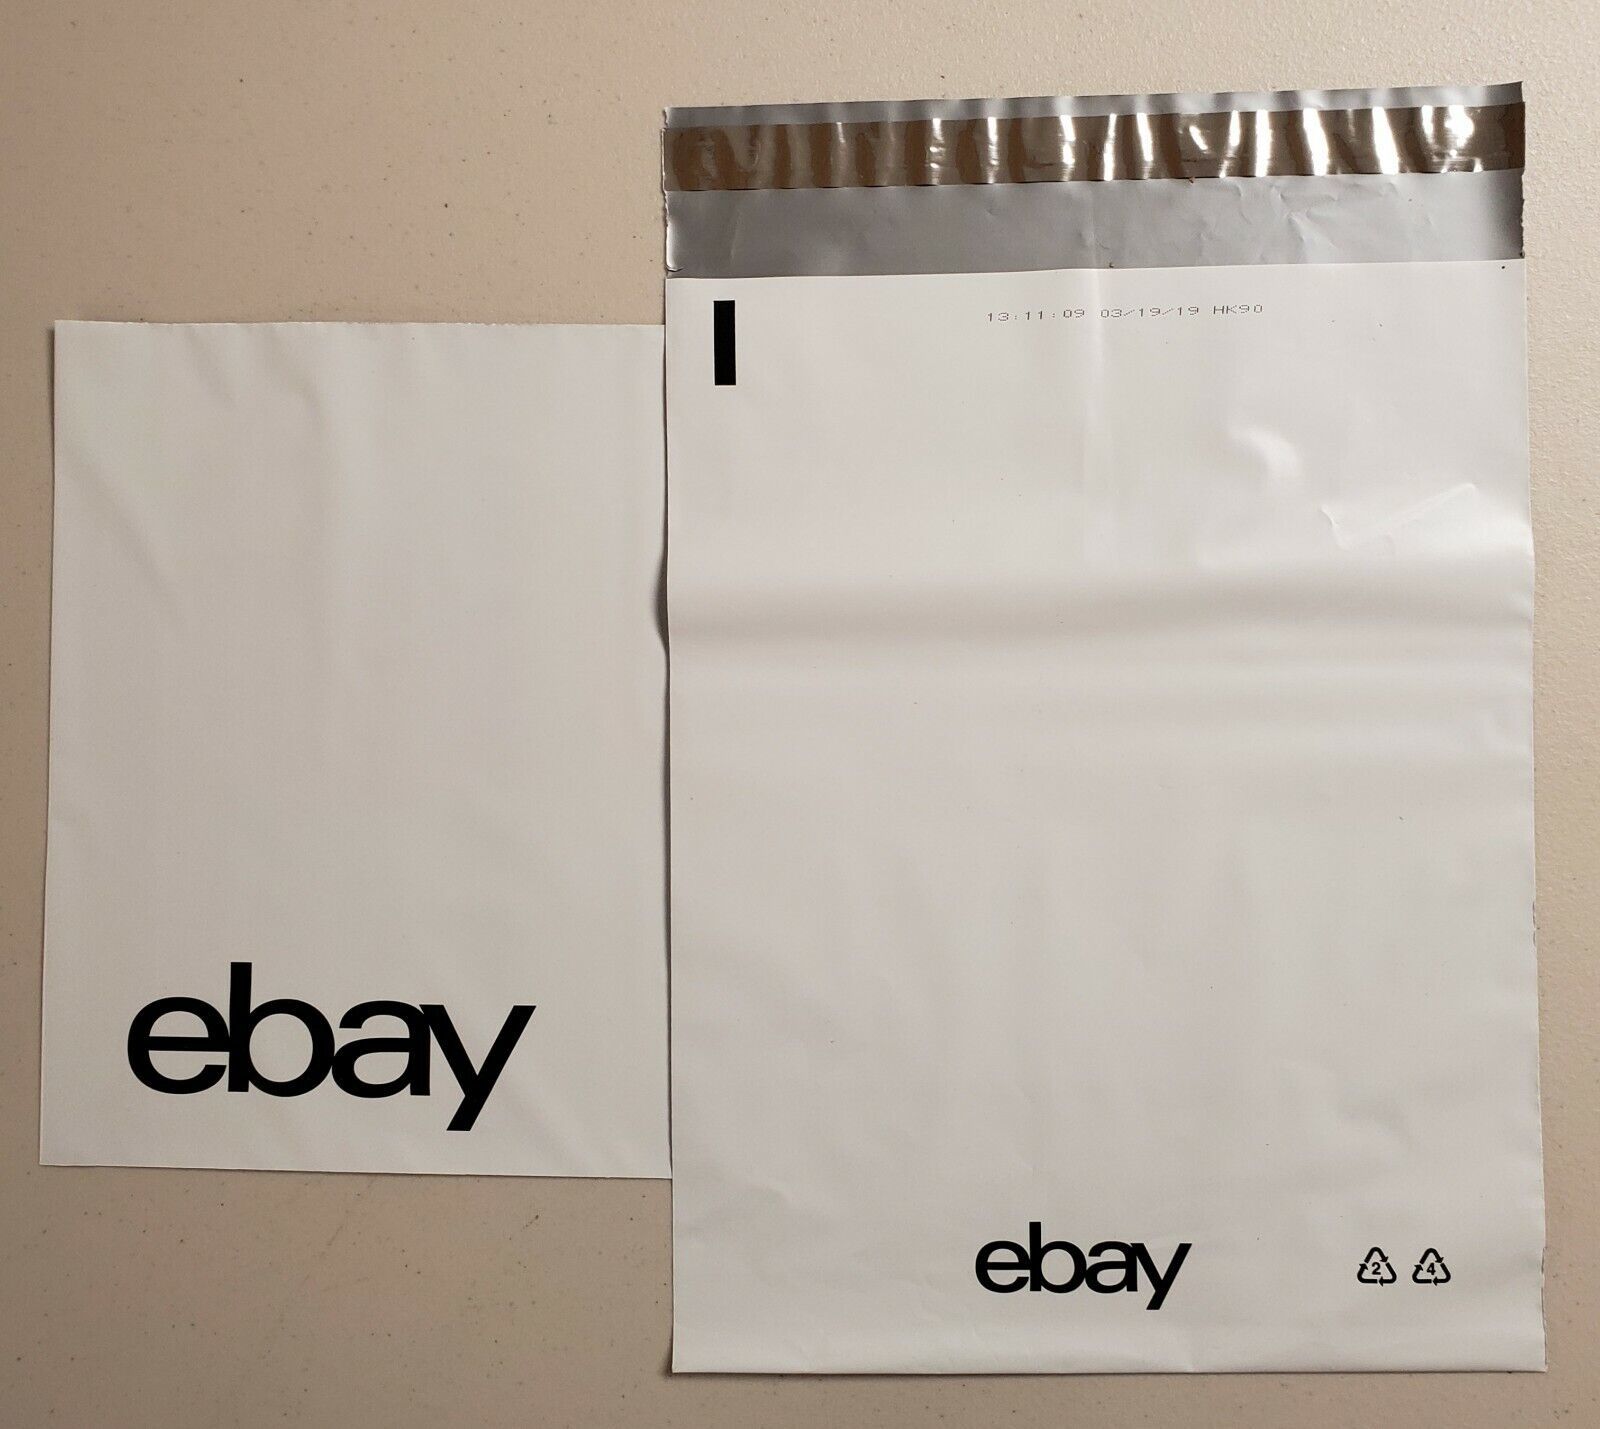 Primary image for eBay Branded Lot of 20 Polyjacket 12"x 15" Mailer Envelopes Shipping Supplies.z